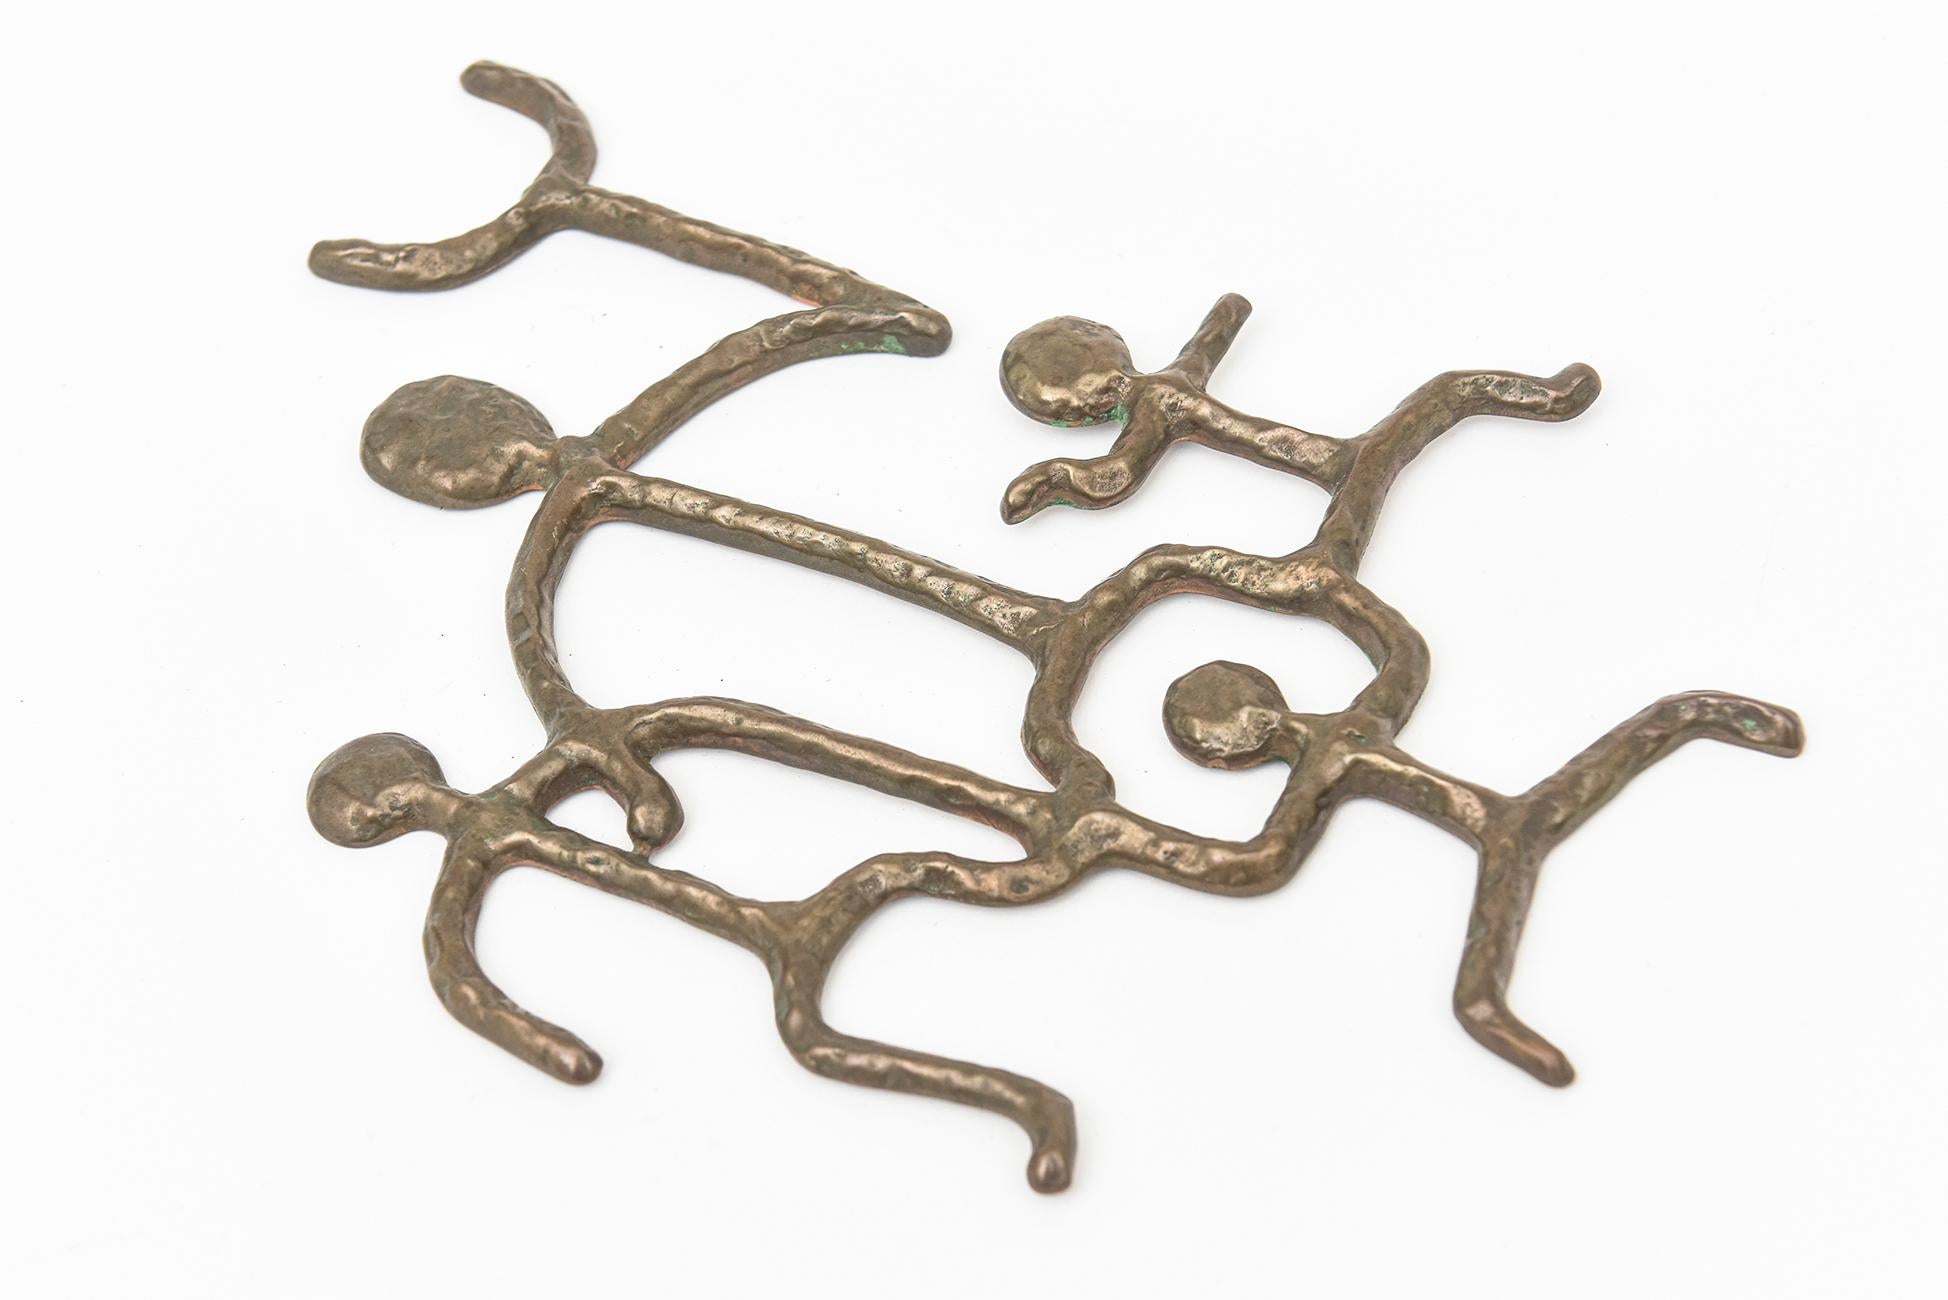 This most unusual work of art from the studio of Michael and Francis Higgins is a hand hammered bronze small stick figure wall sculpture. It is signed Higgins and from the 60's.
It is rare and obscure. One can frame it, use it on the wall as is or